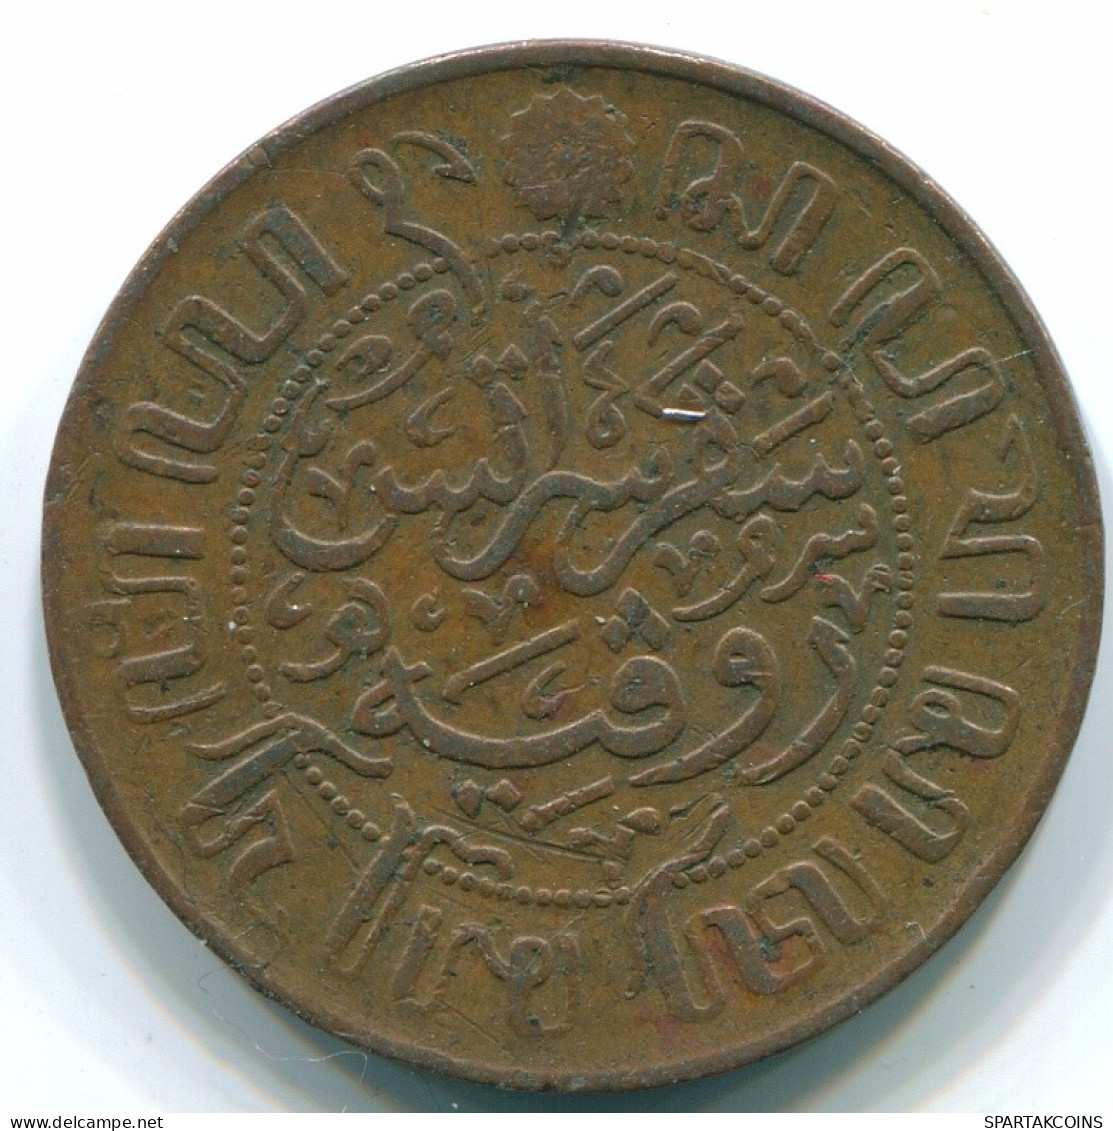 1 CENT 1929 NETHERLANDS EAST INDIES INDONESIA Copper Colonial Coin #S10103.U.A - Dutch East Indies